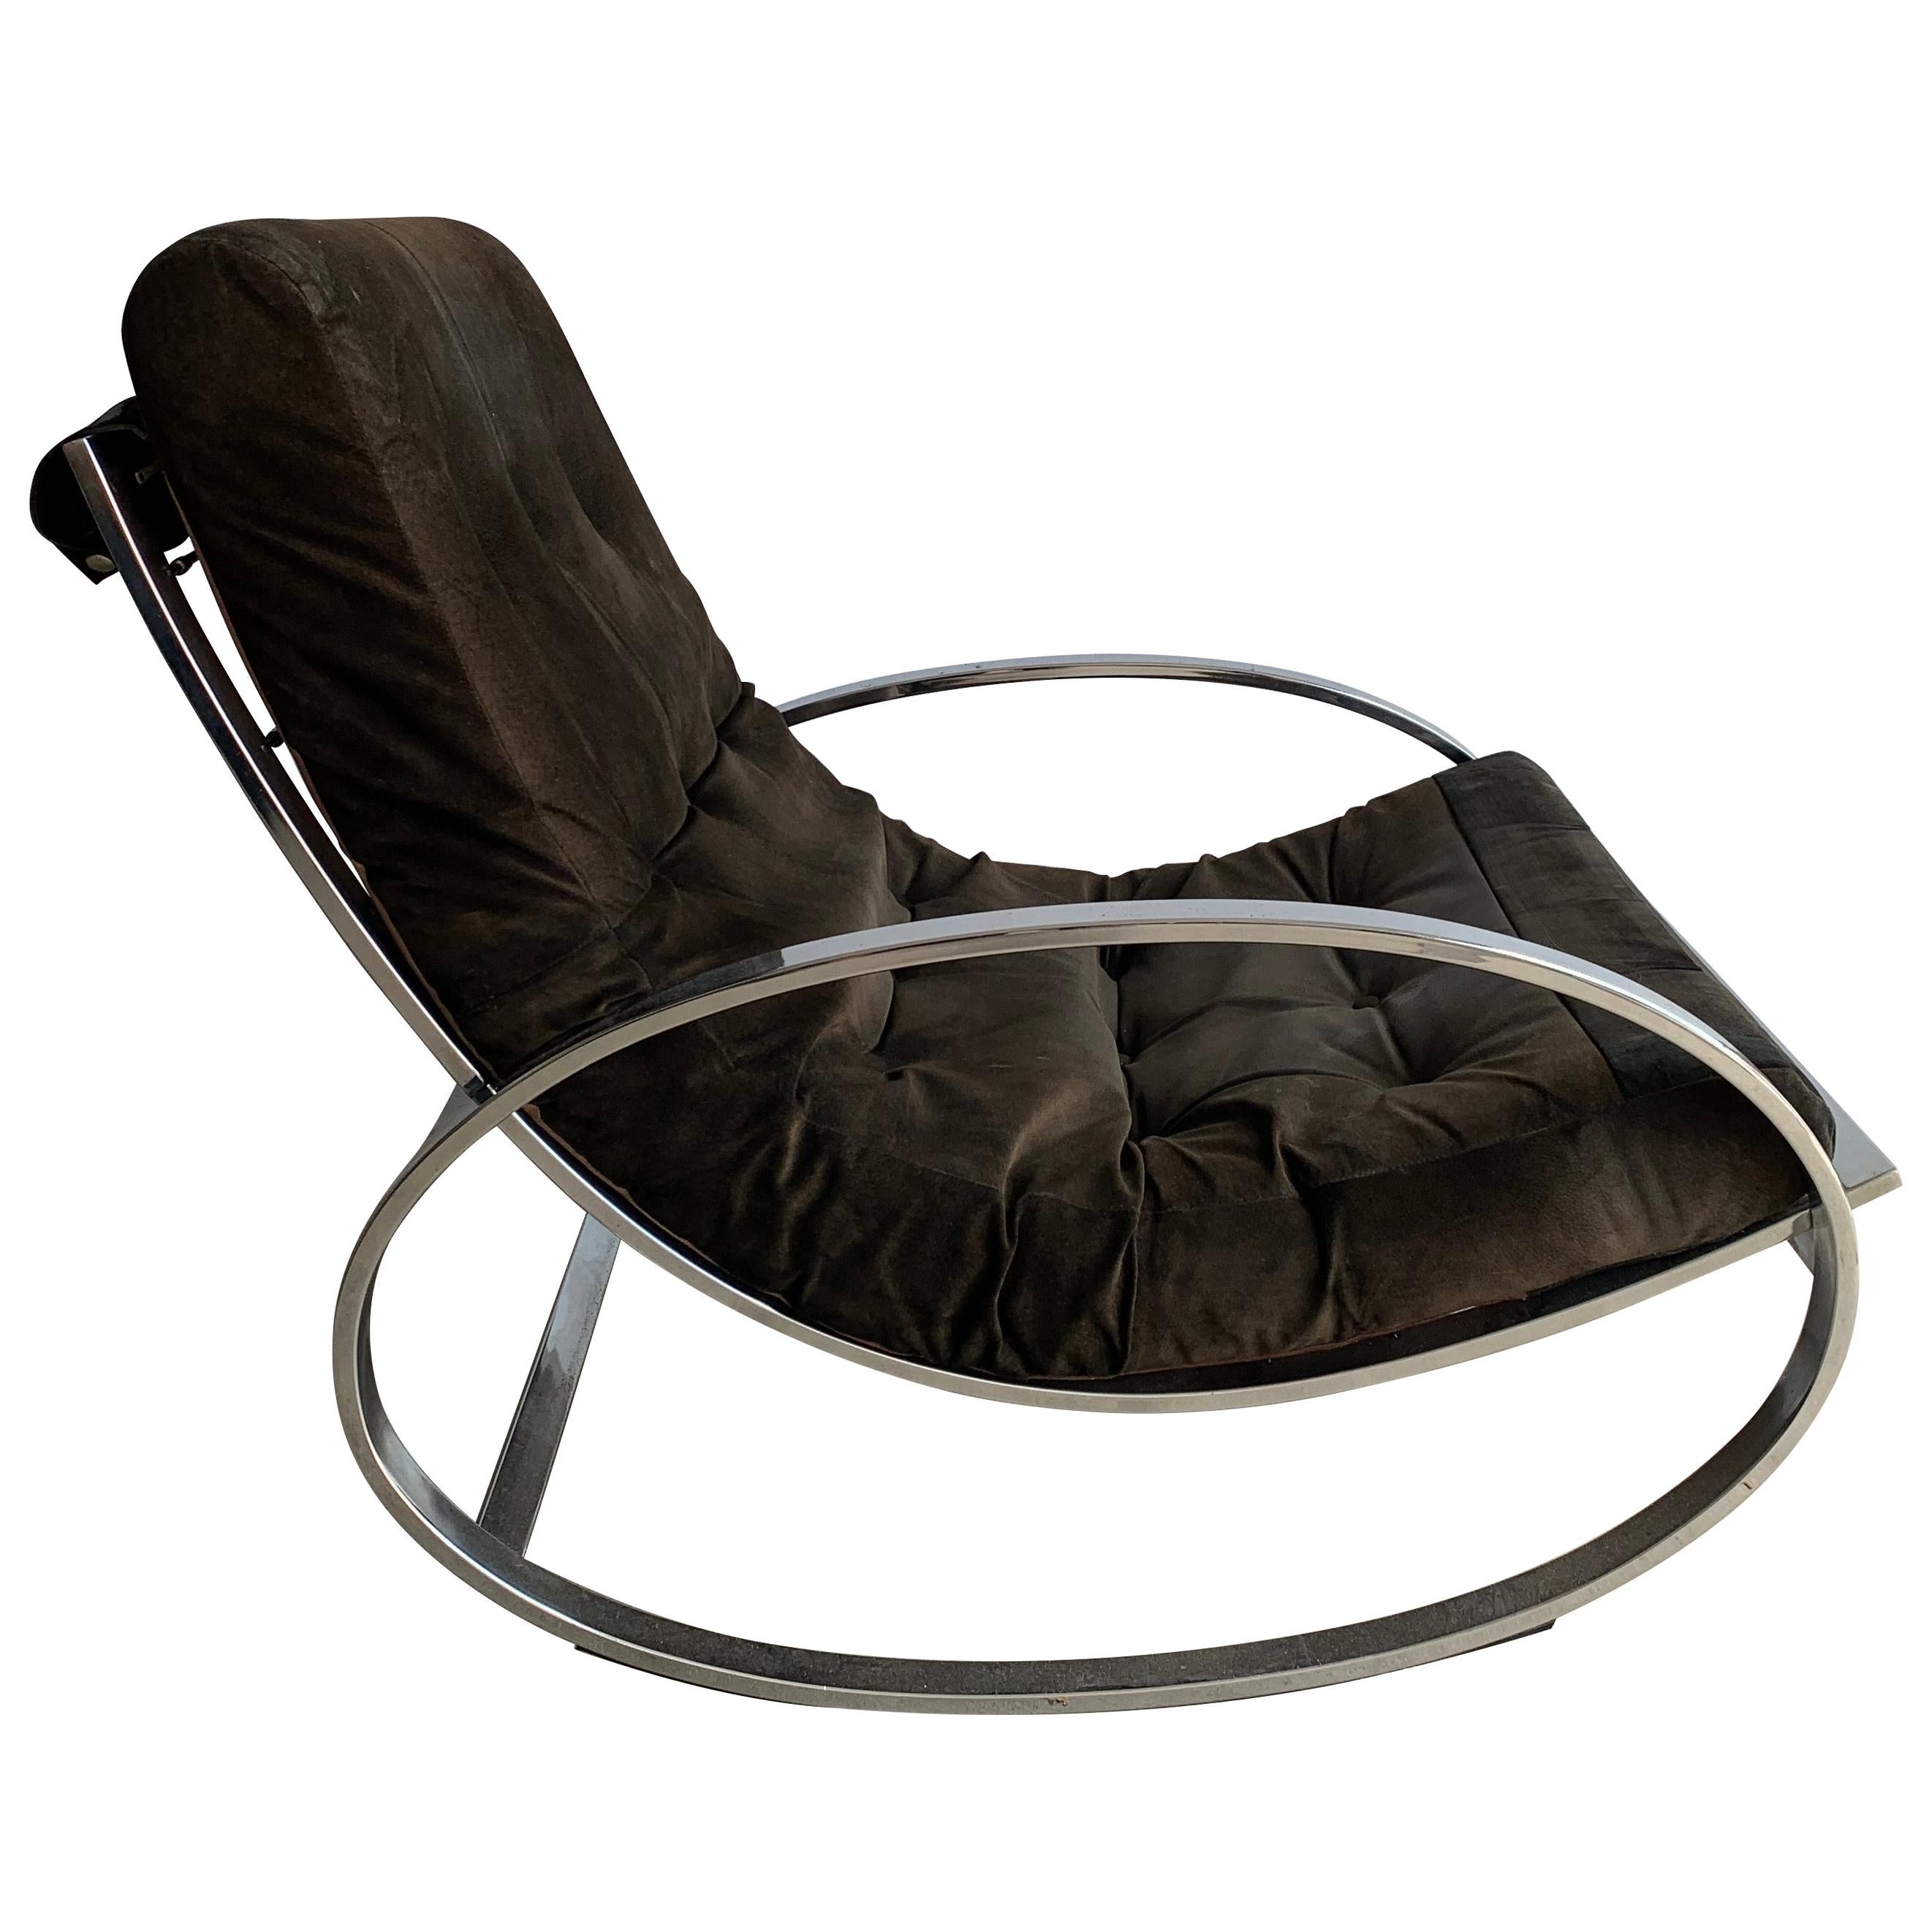 20th Century Brown Chrome-Plated Rocking Chair by Renato Zevi for Selig, 1970